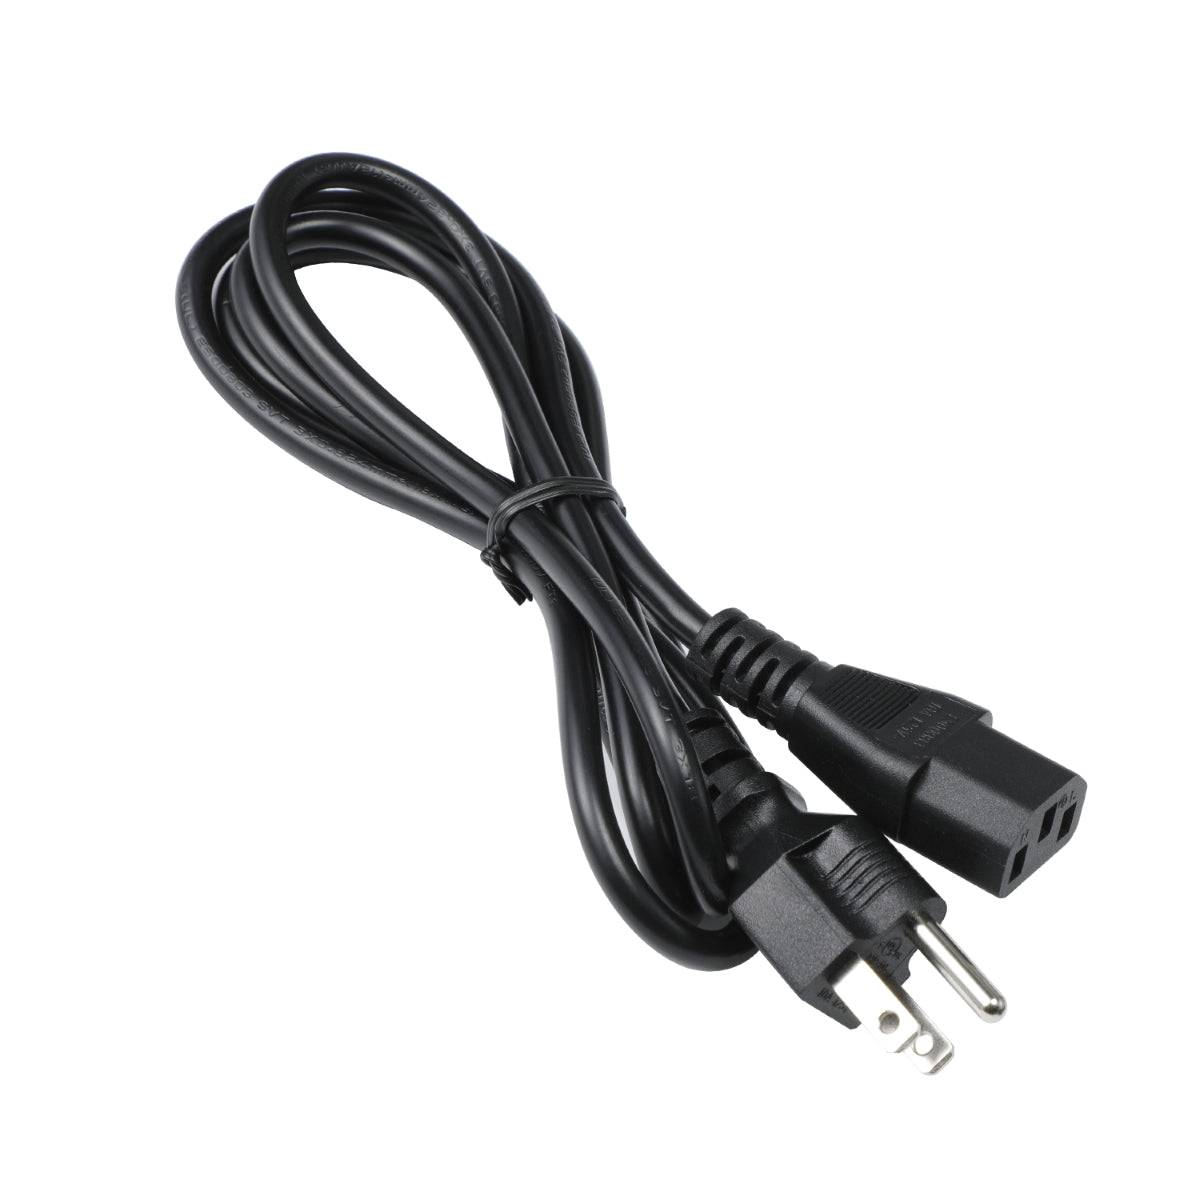 Power Cord for HP Pavilion 550-150 Computer.